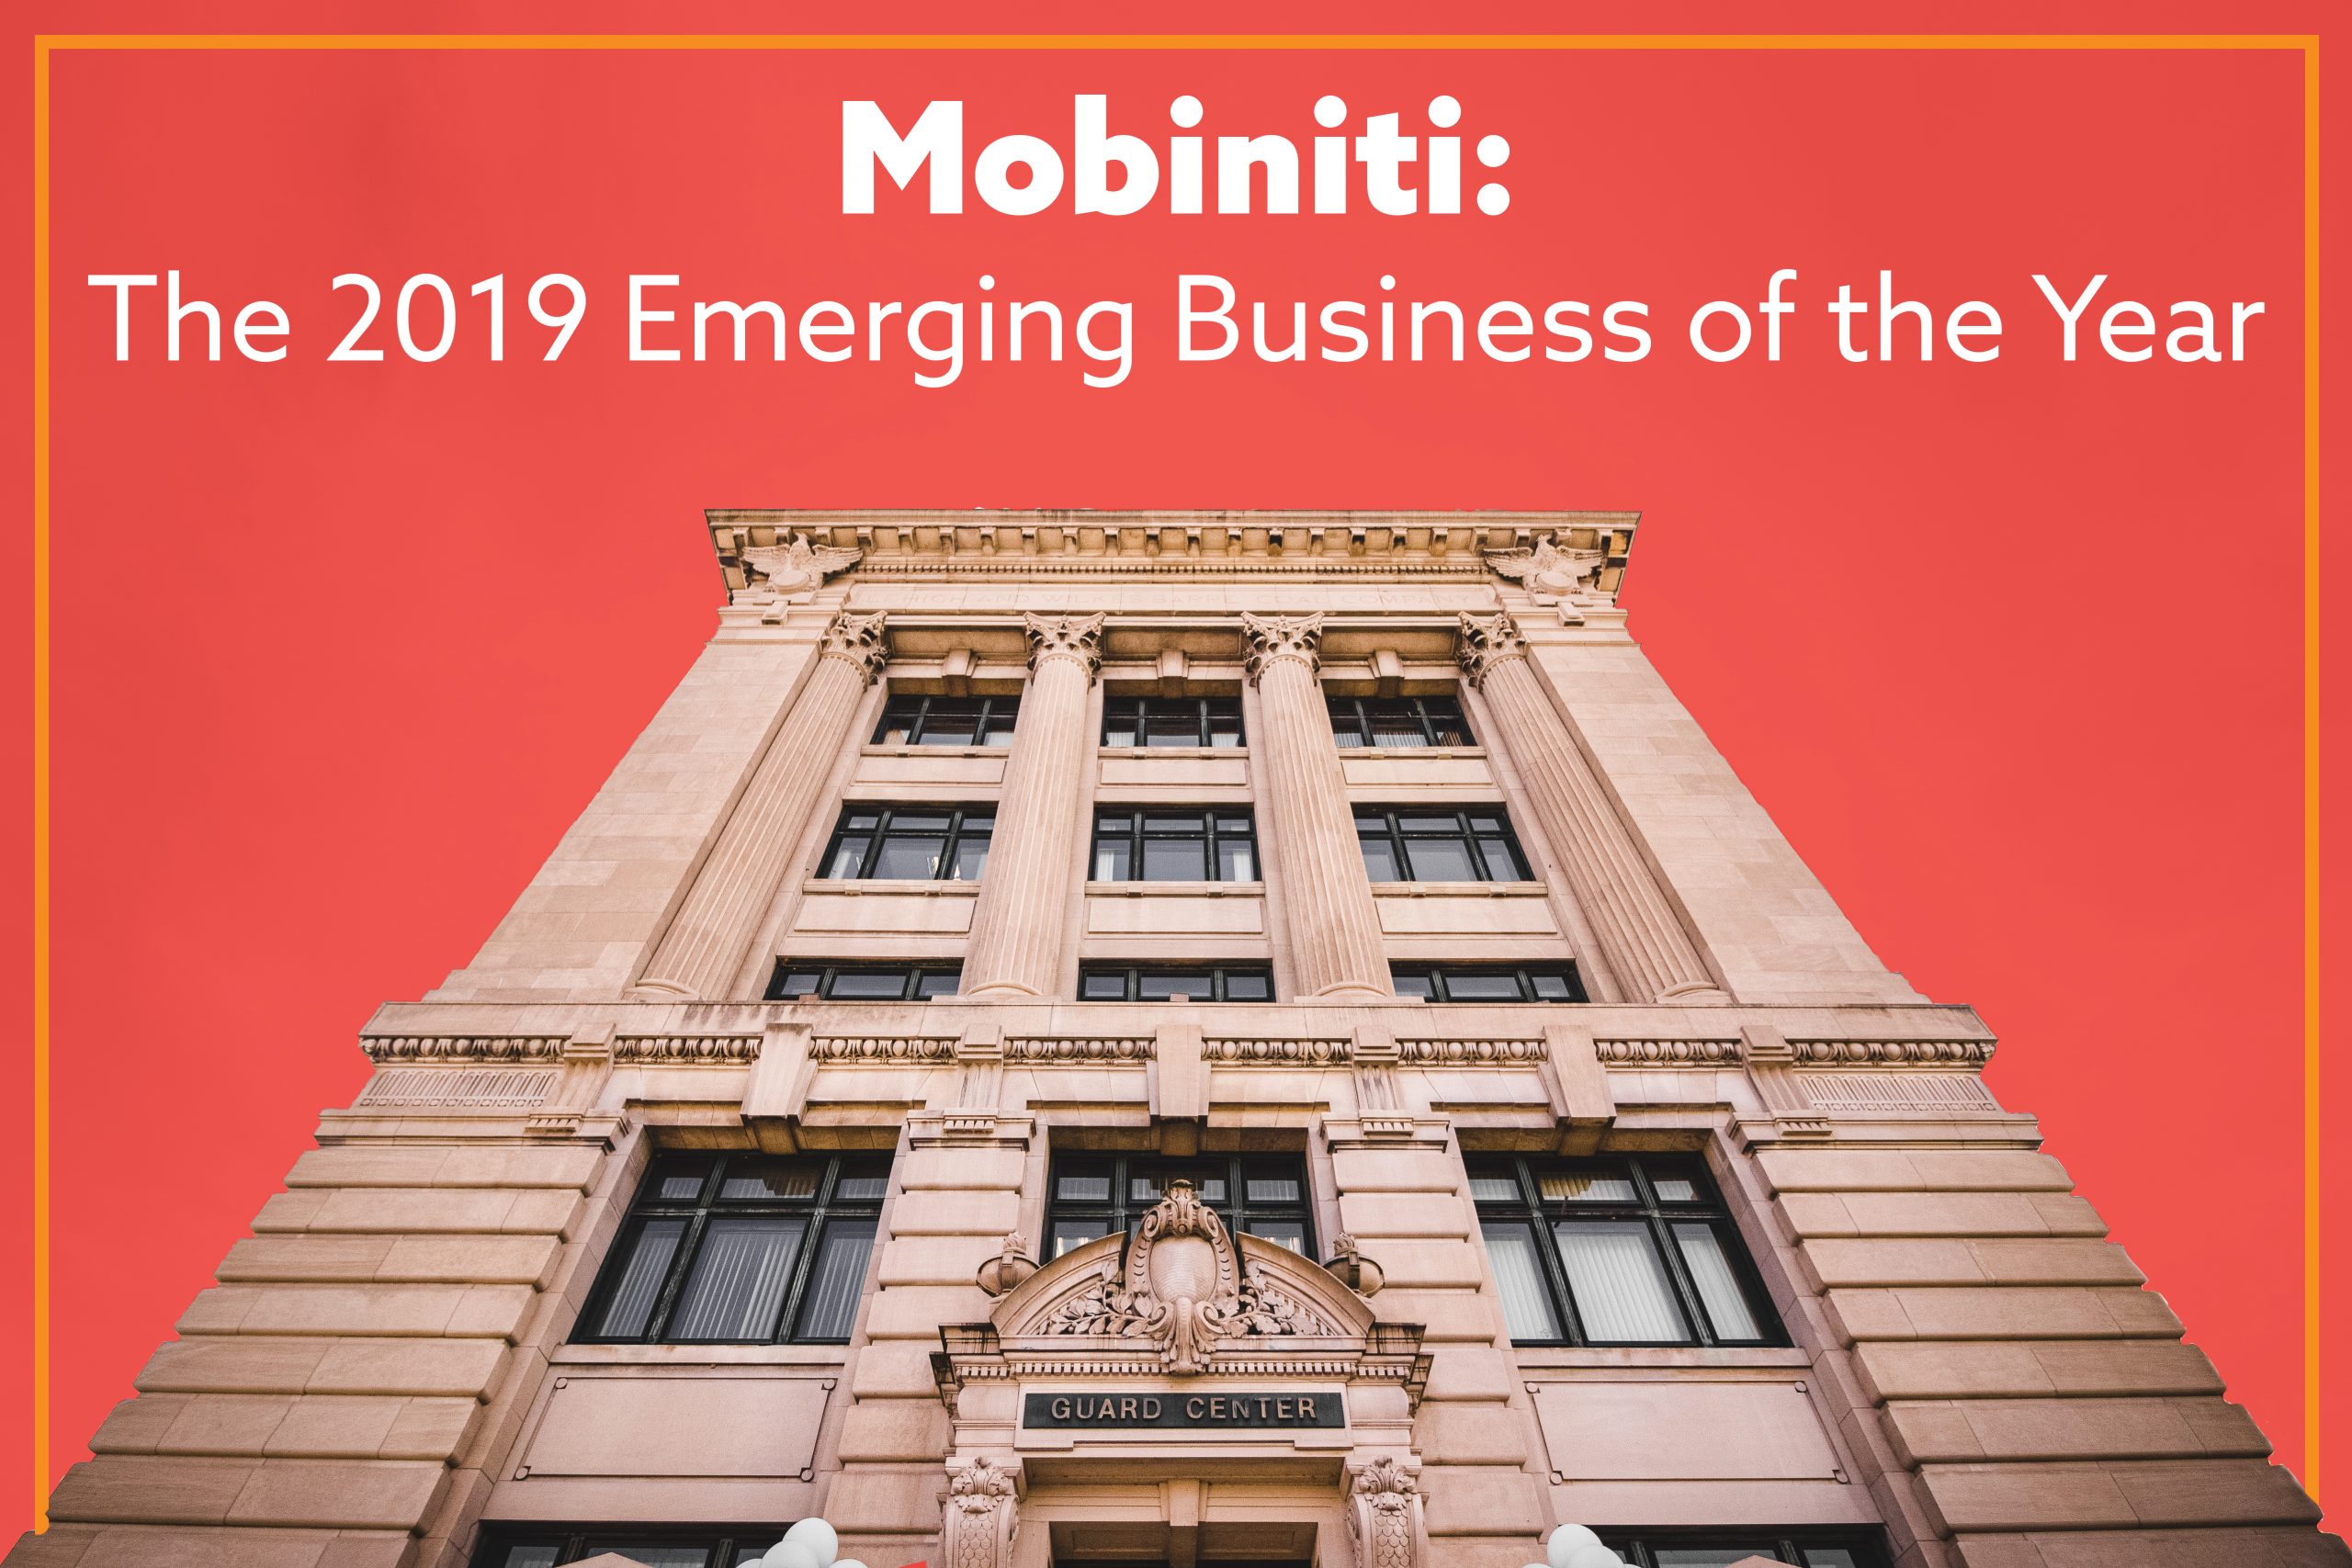 Mobiniti – The 2019 Emerging Business of the Year